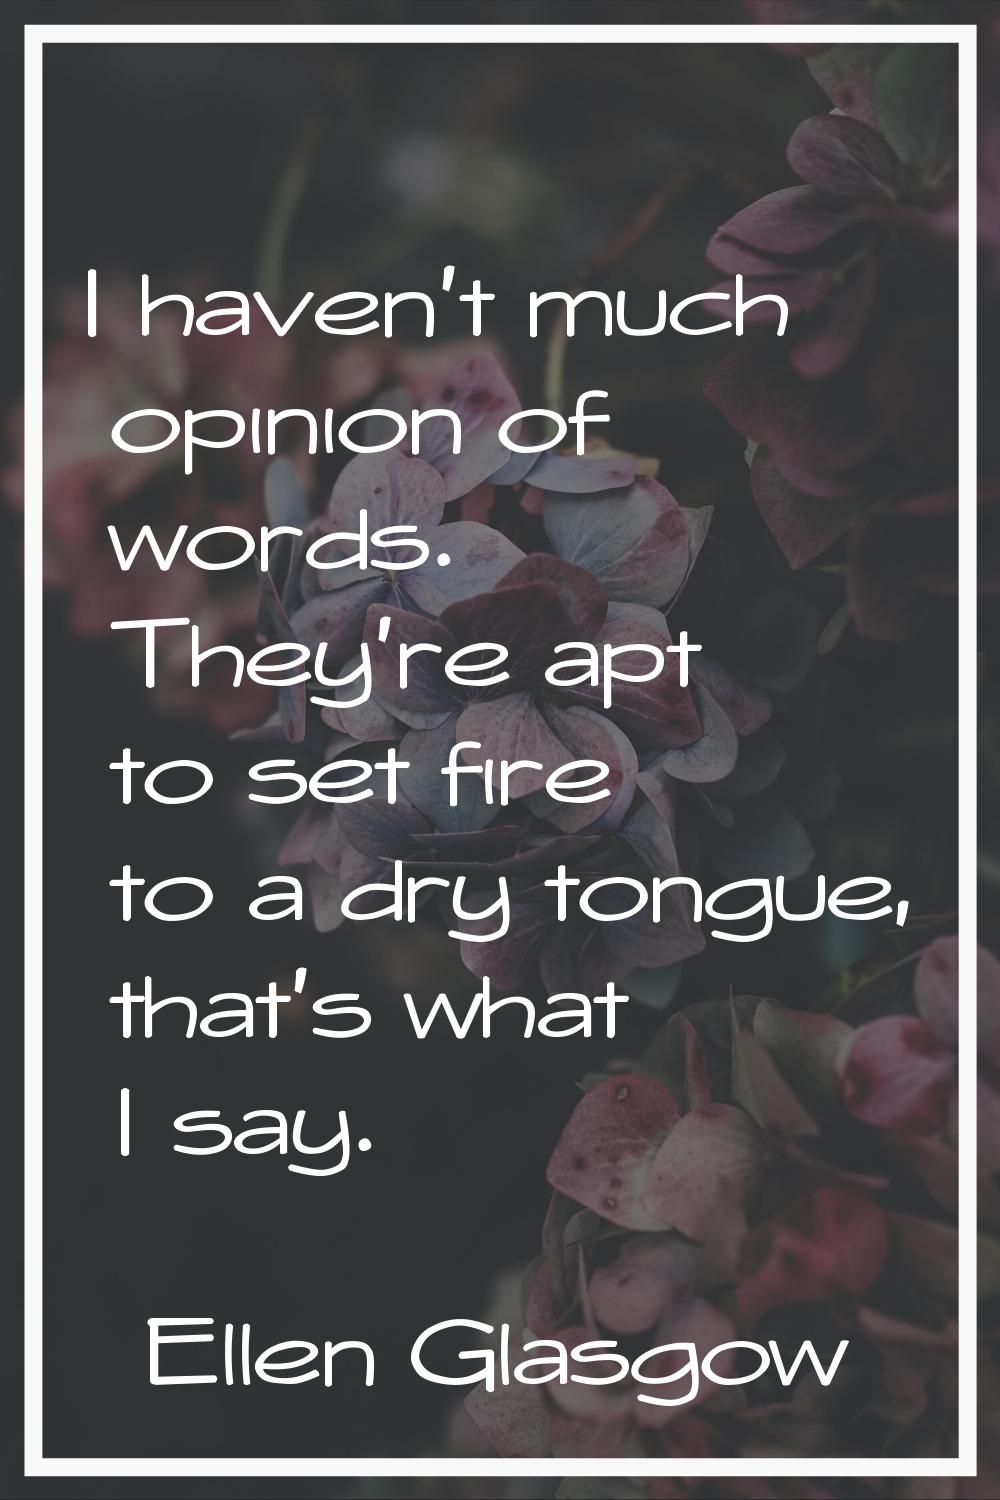 I haven't much opinion of words. They're apt to set fire to a dry tongue, that's what I say.